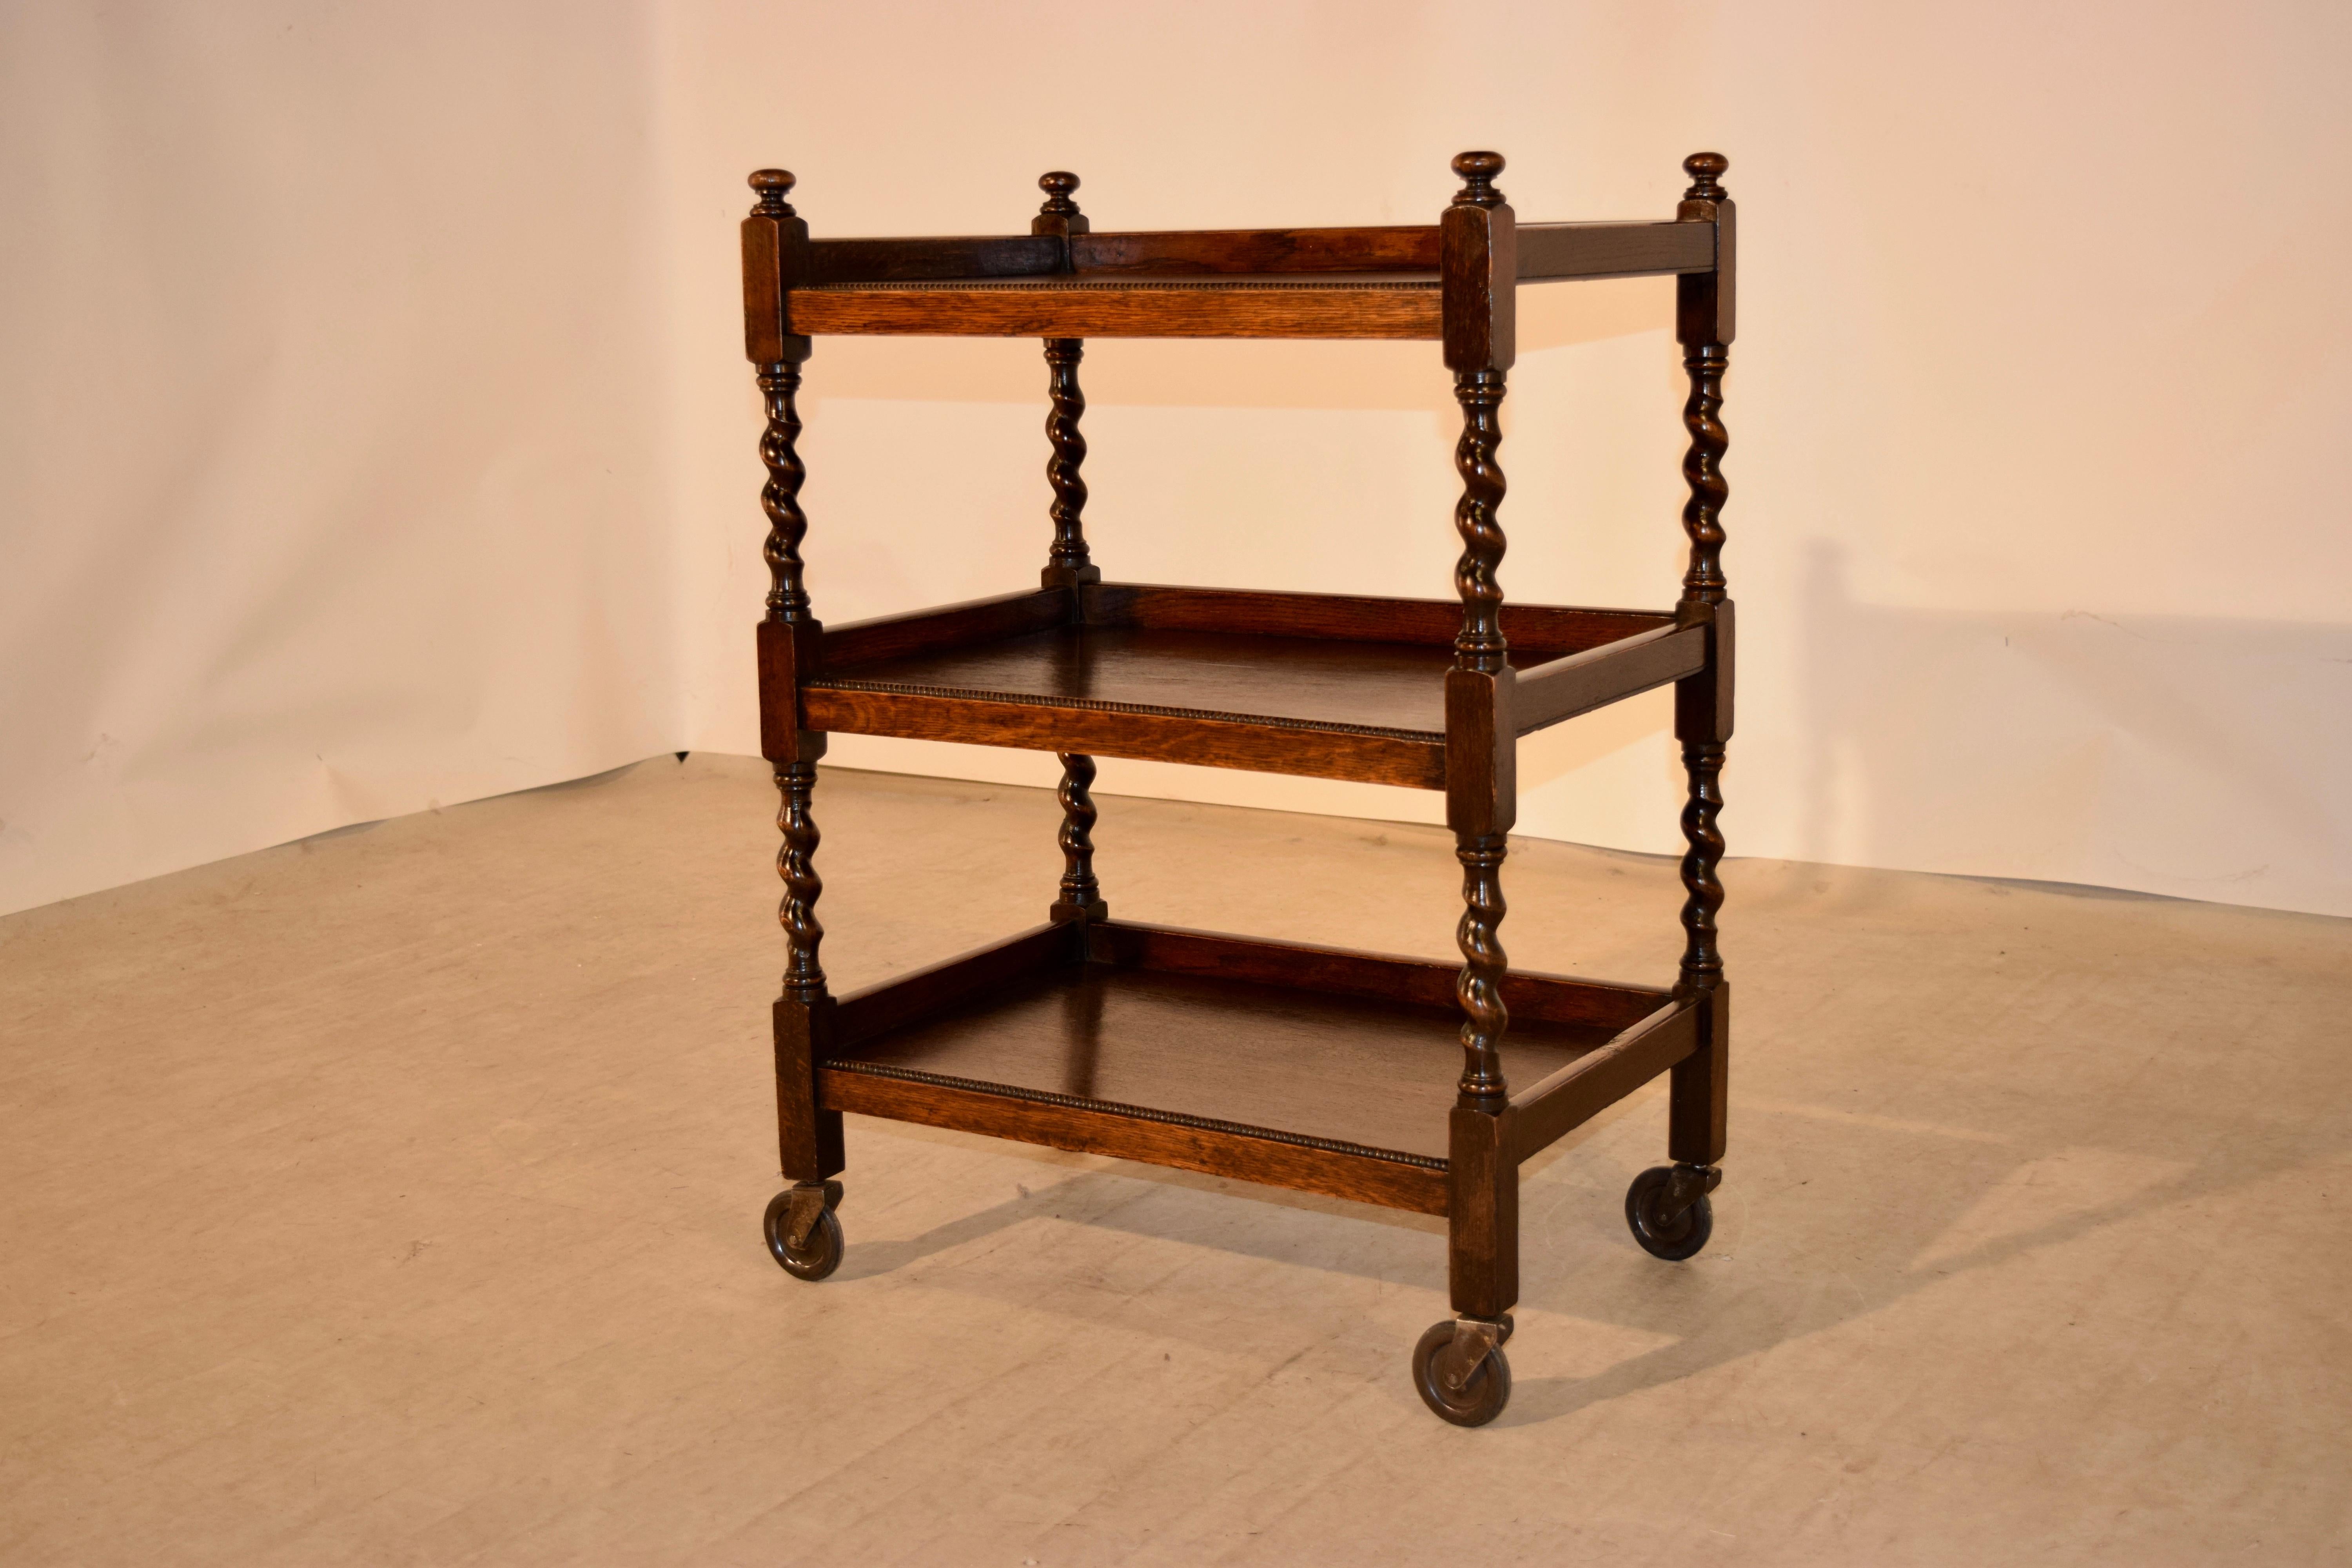 19th century oak drinks cart from England. The cart has three shelves with beaded front edges separated by hand-turned barley twist shelf supports and raised on casters.